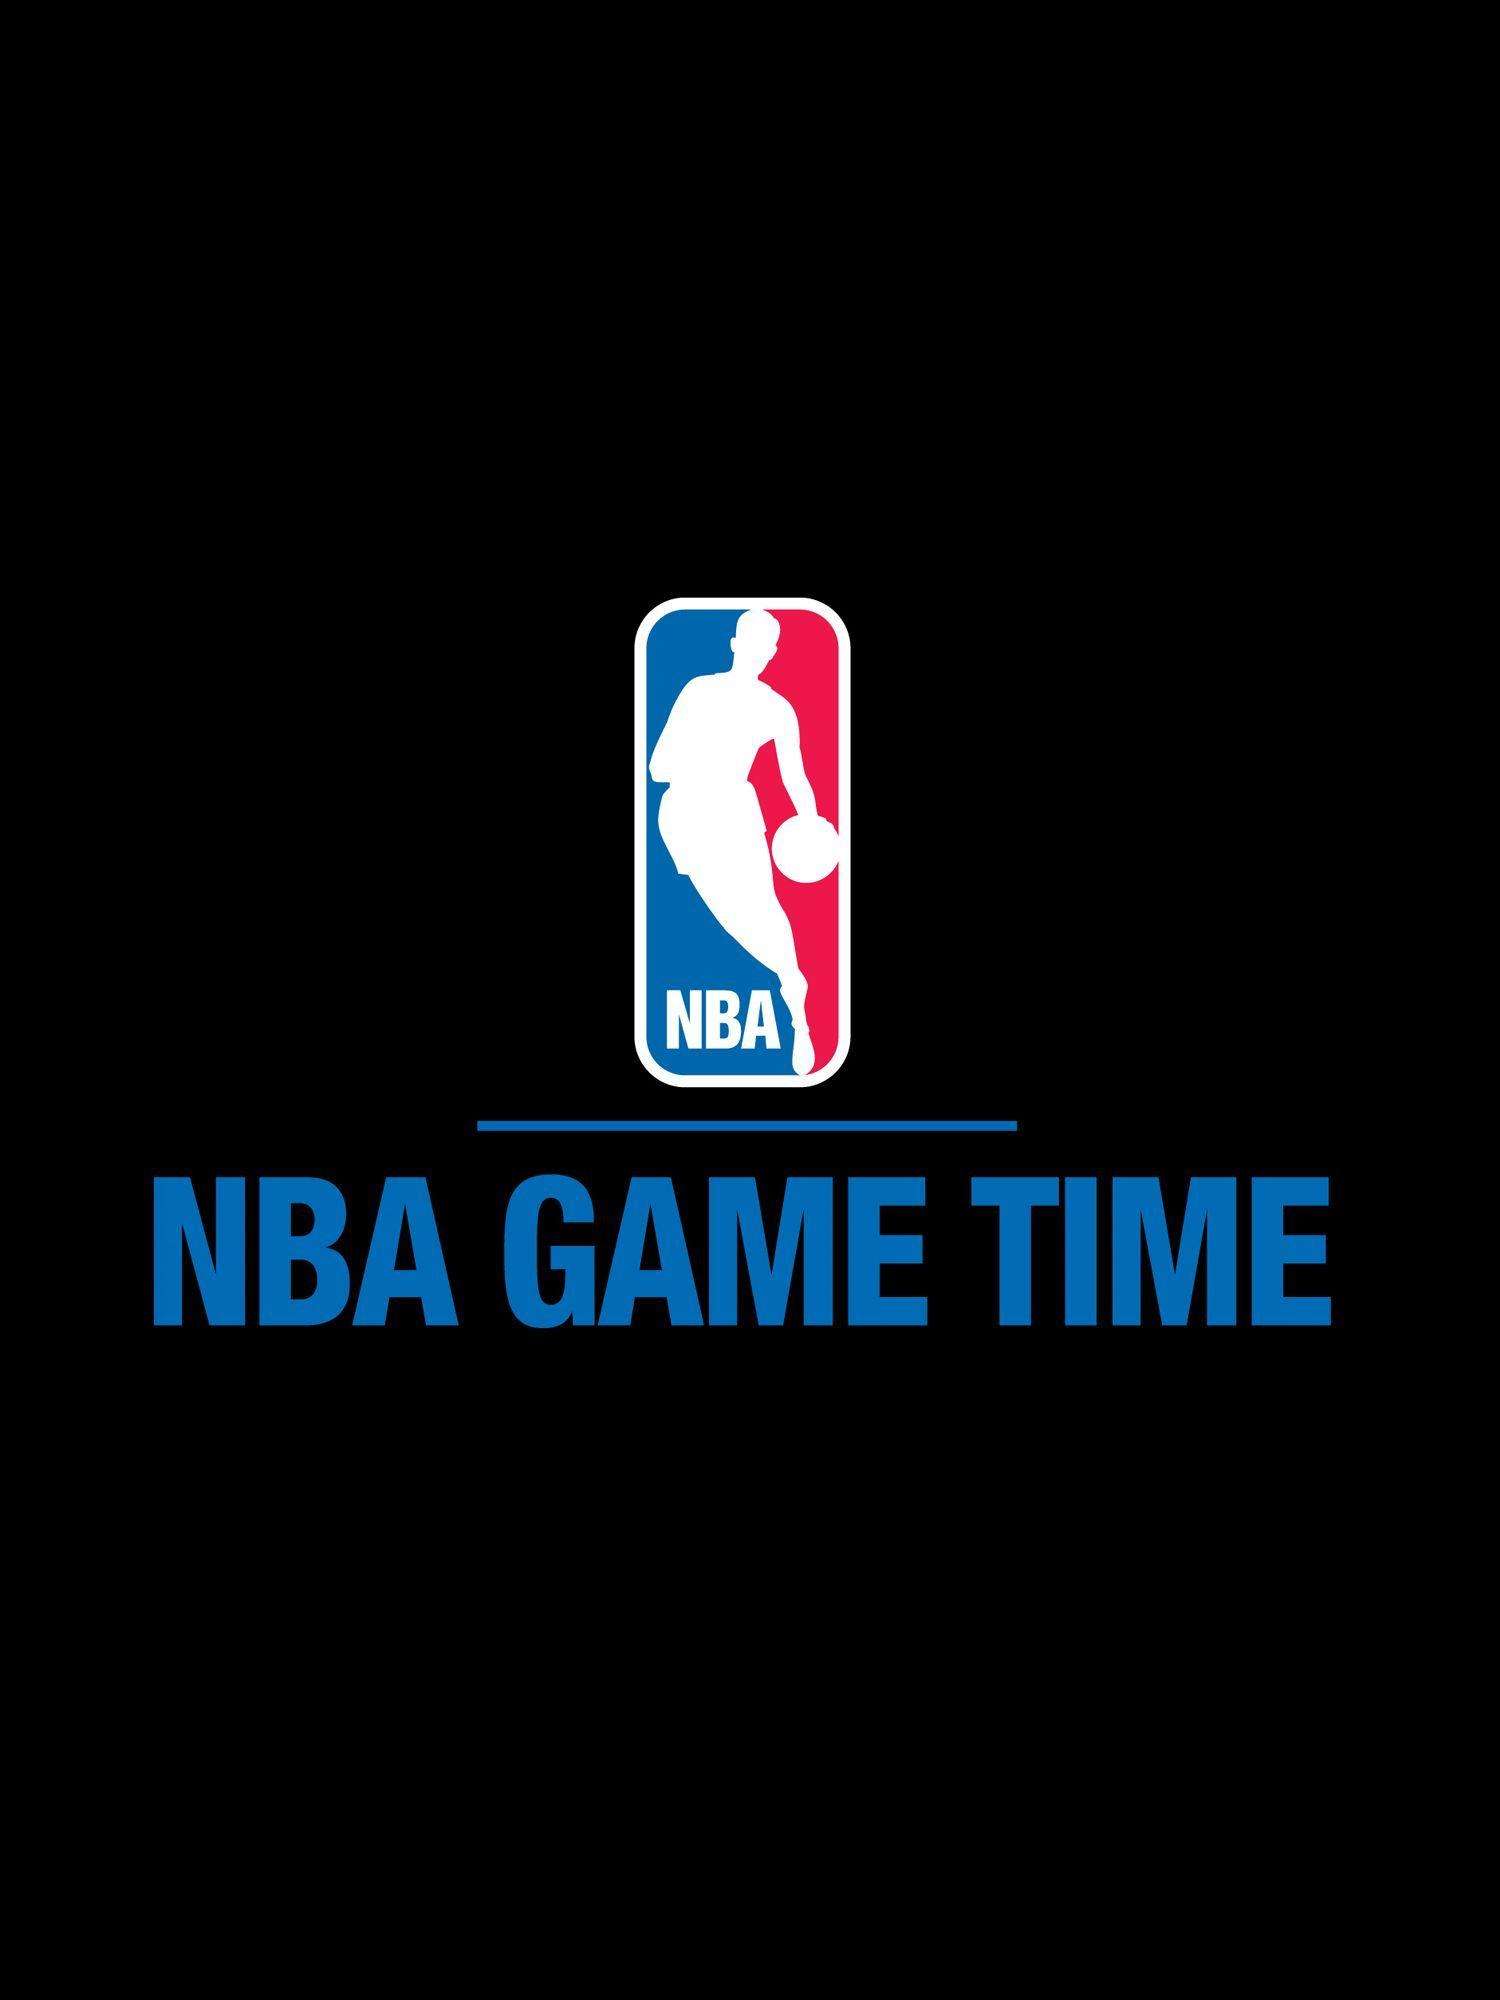 NBA Game Time Logo - NBA Gametime TV Show: News, Videos, Full Episodes and More